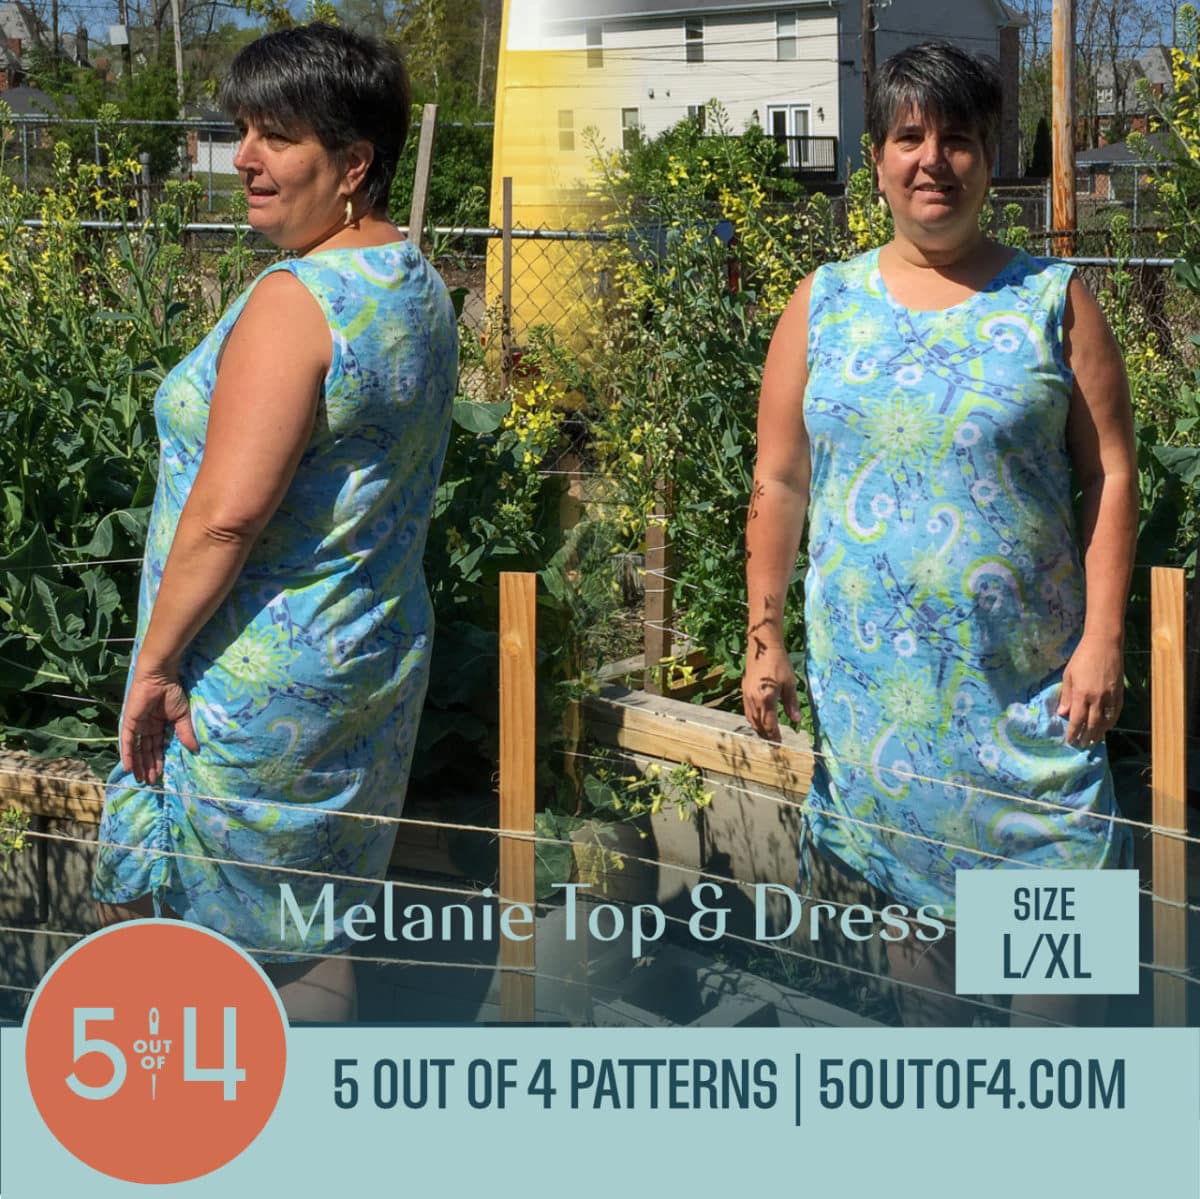 Melanie Top and Dress - 5 out of 4 Patterns